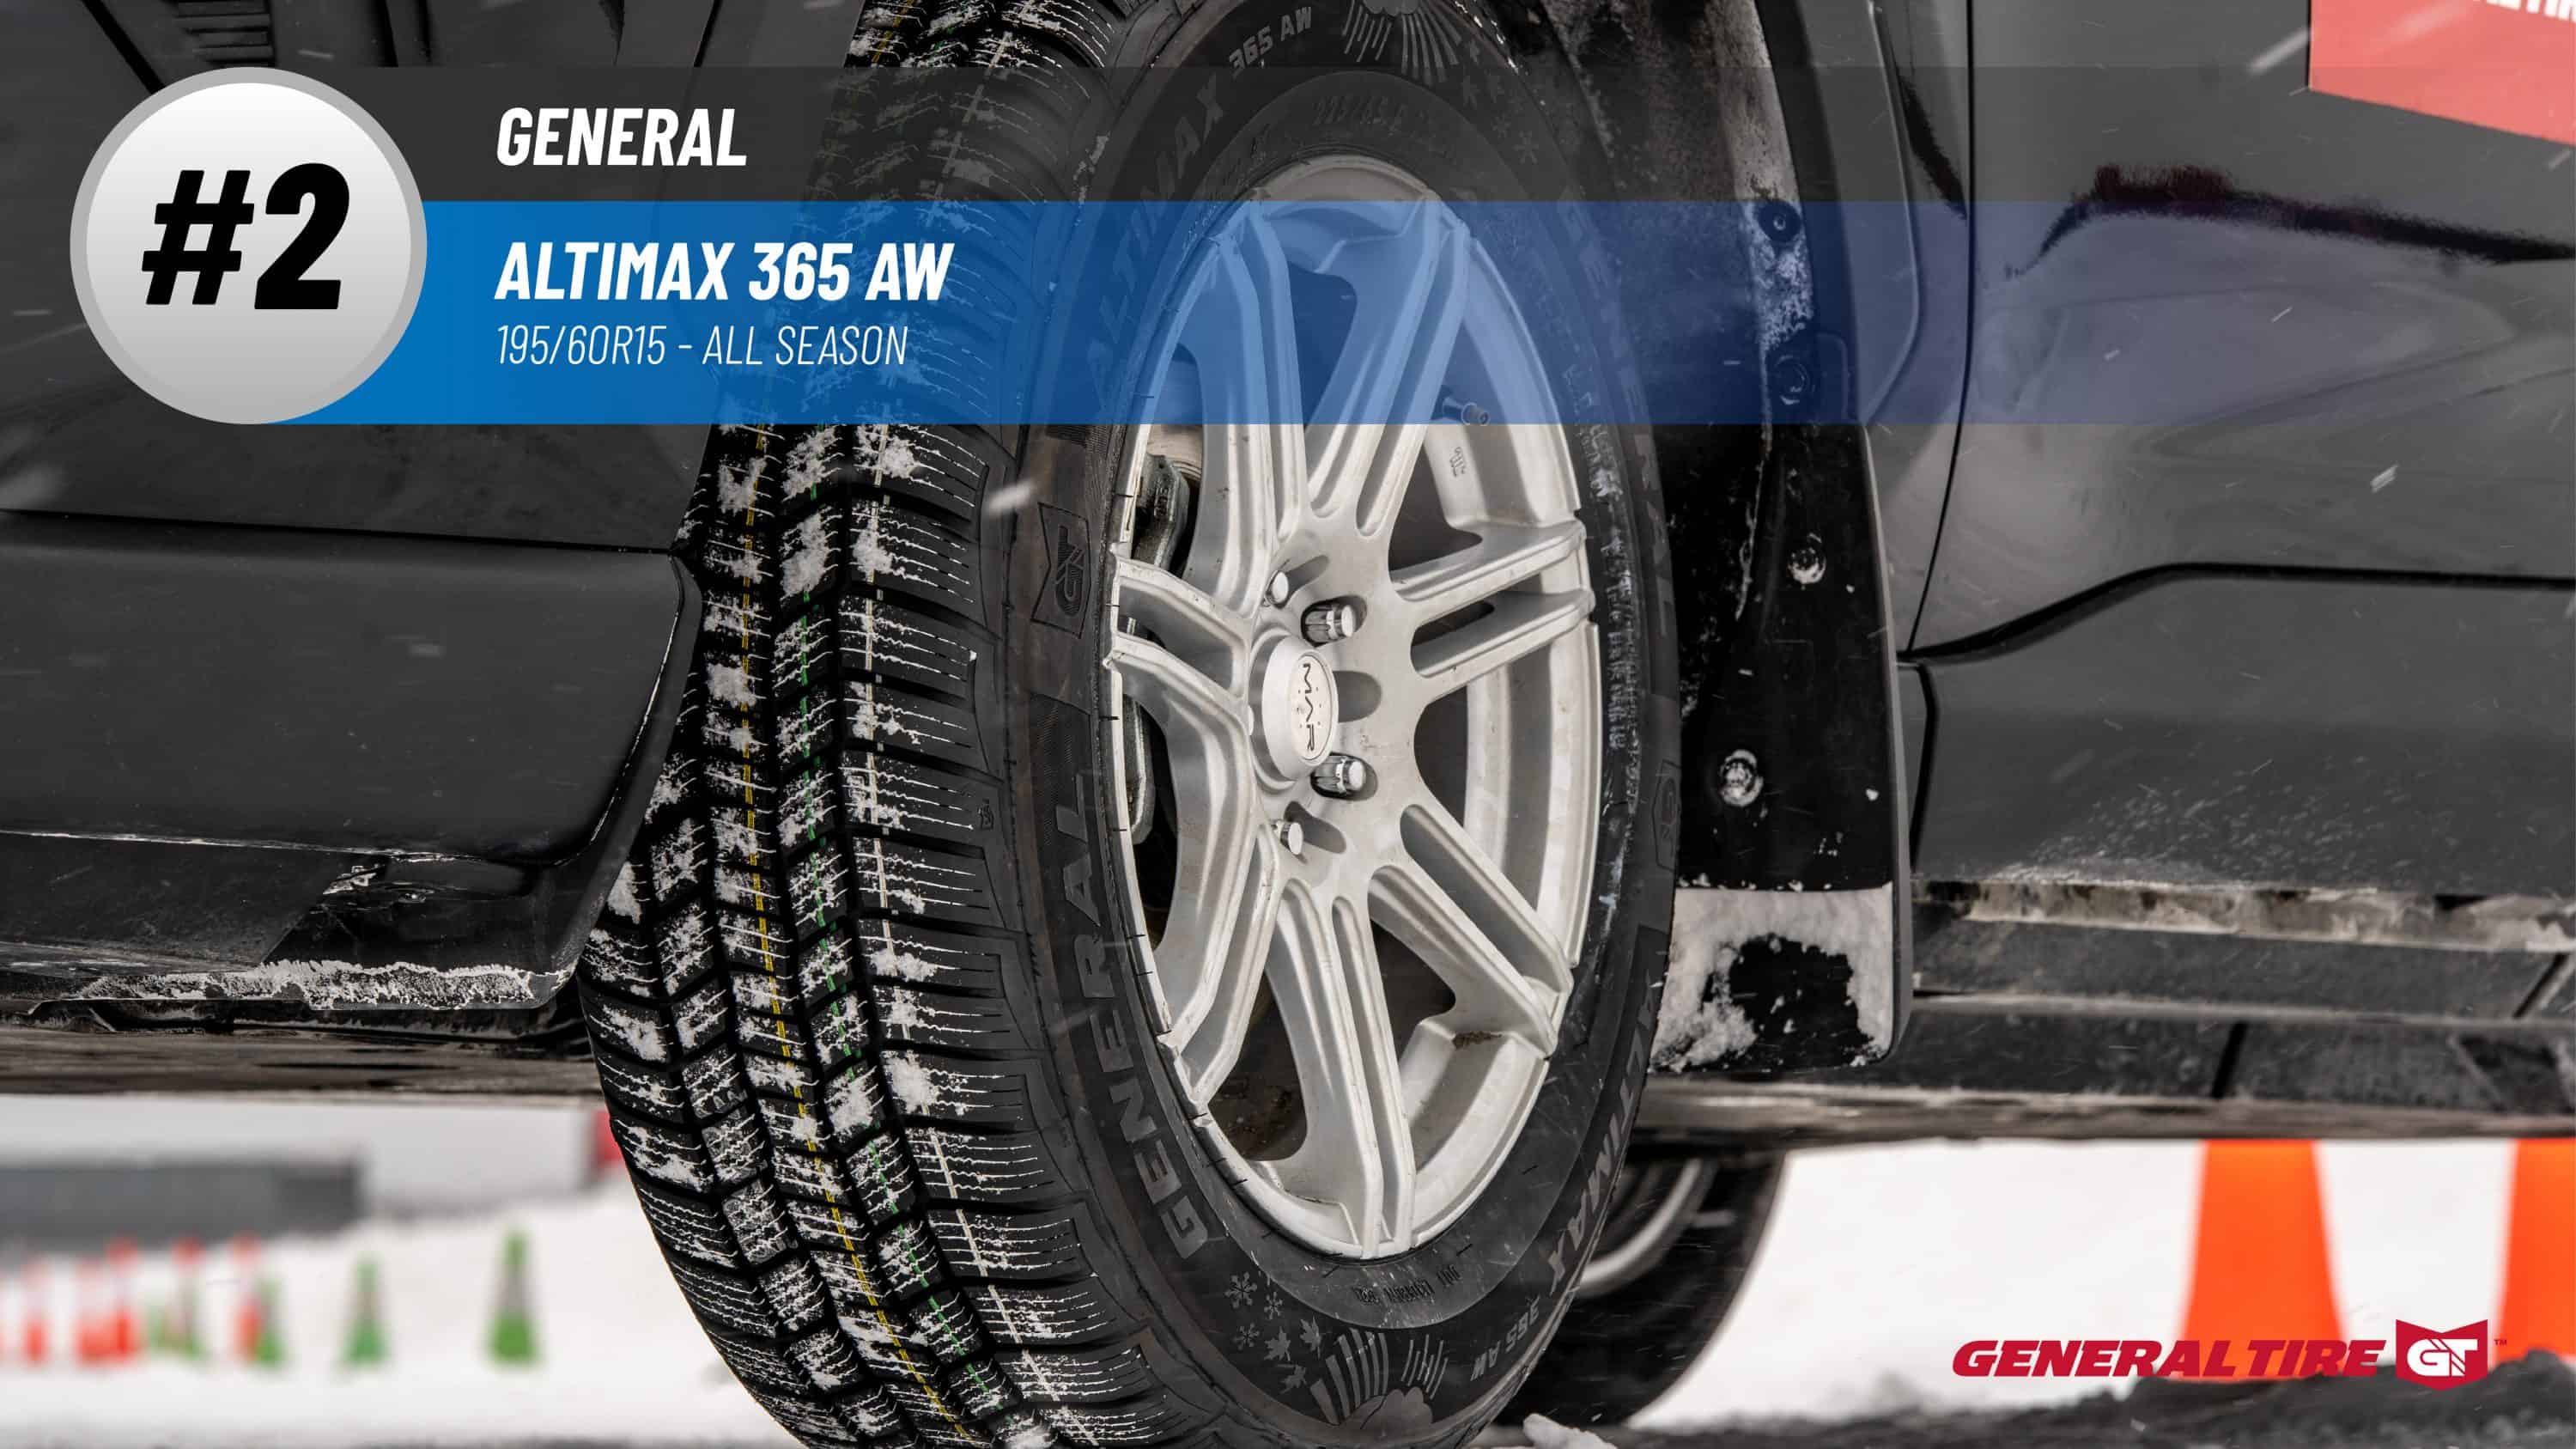 Top #2 All Season Tires: General Altimax 365 AW – 195/60R15